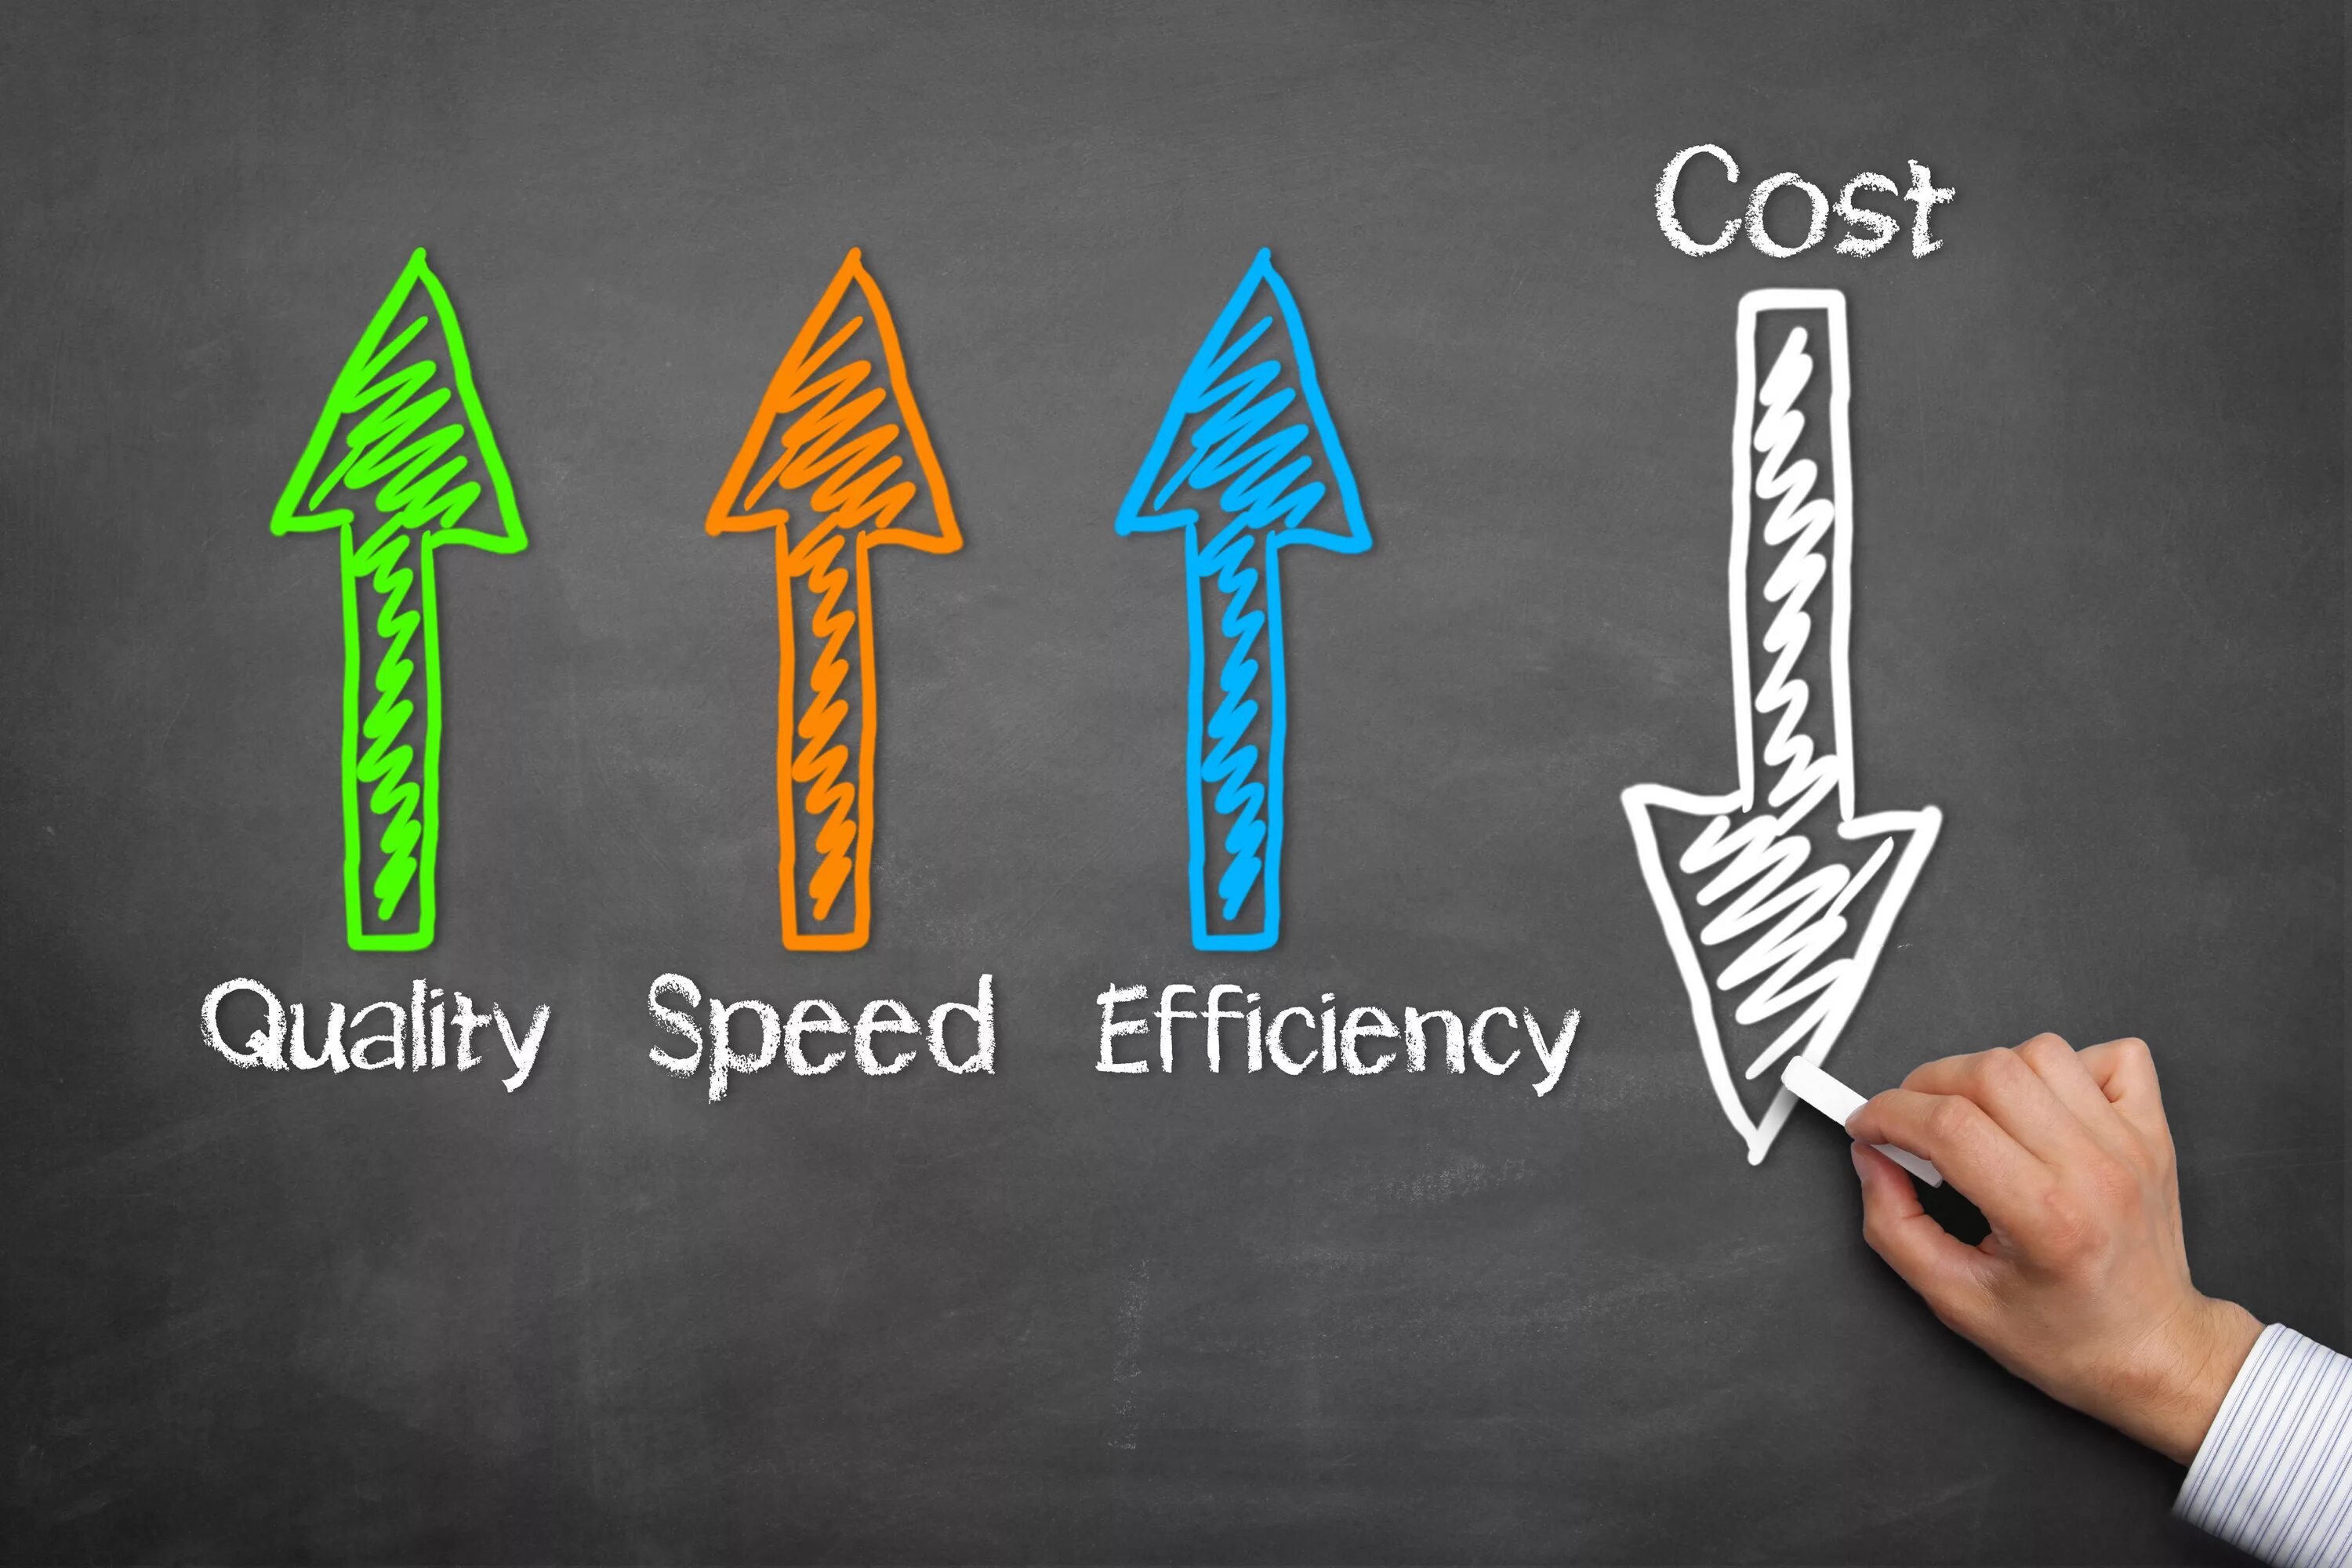 Cost efficiency. Cost of quality. Cost картинка. Business efficiency.